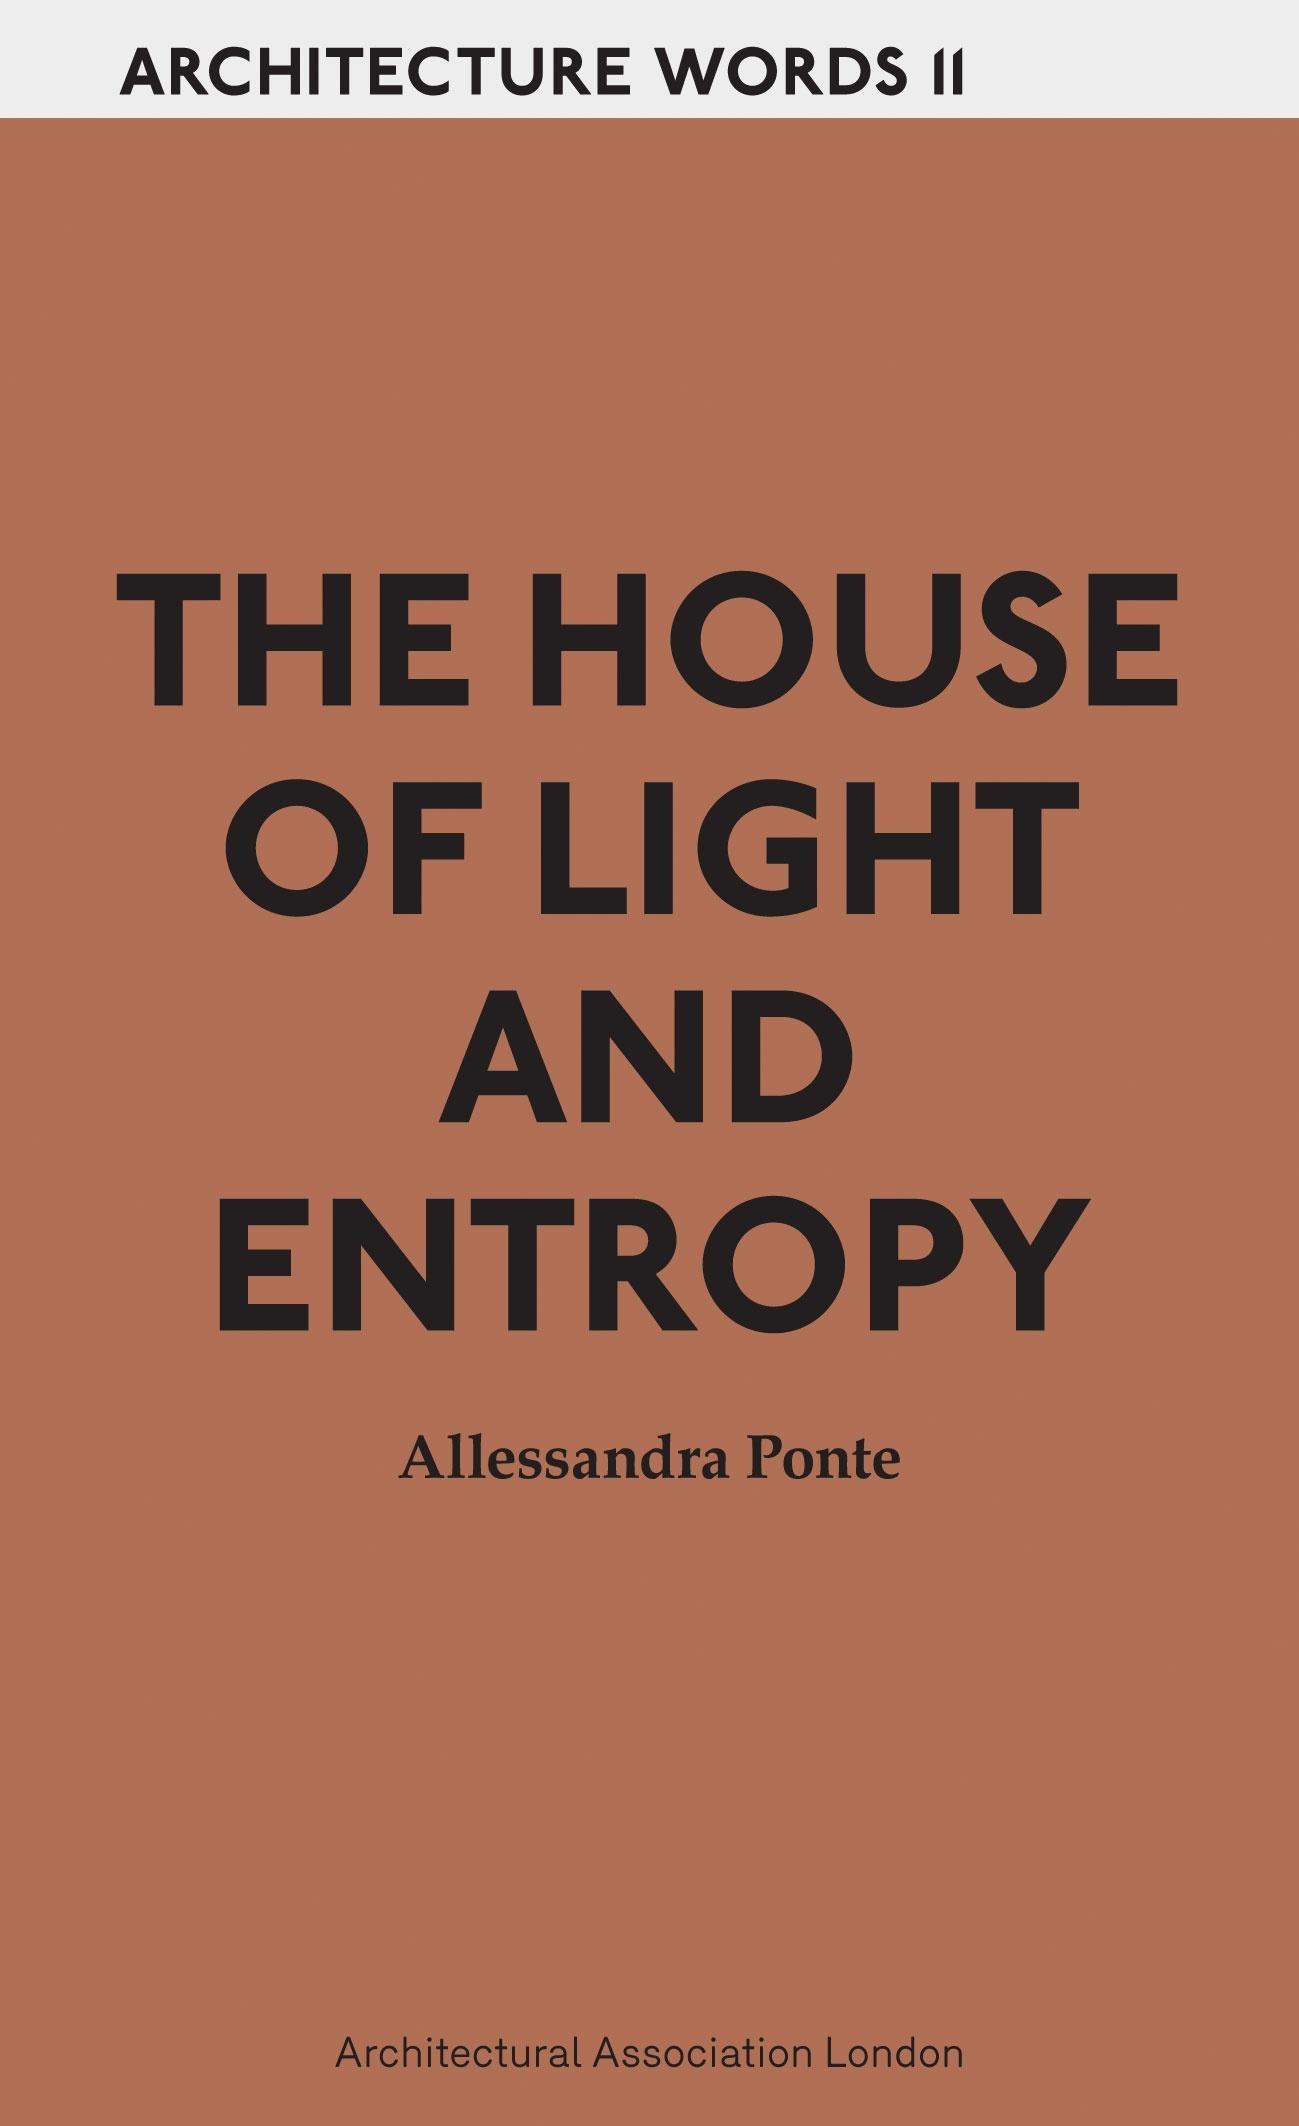 THE HOUSE OF LIGHT AND ENTROPY. ARCHITECTURE WORDS 11